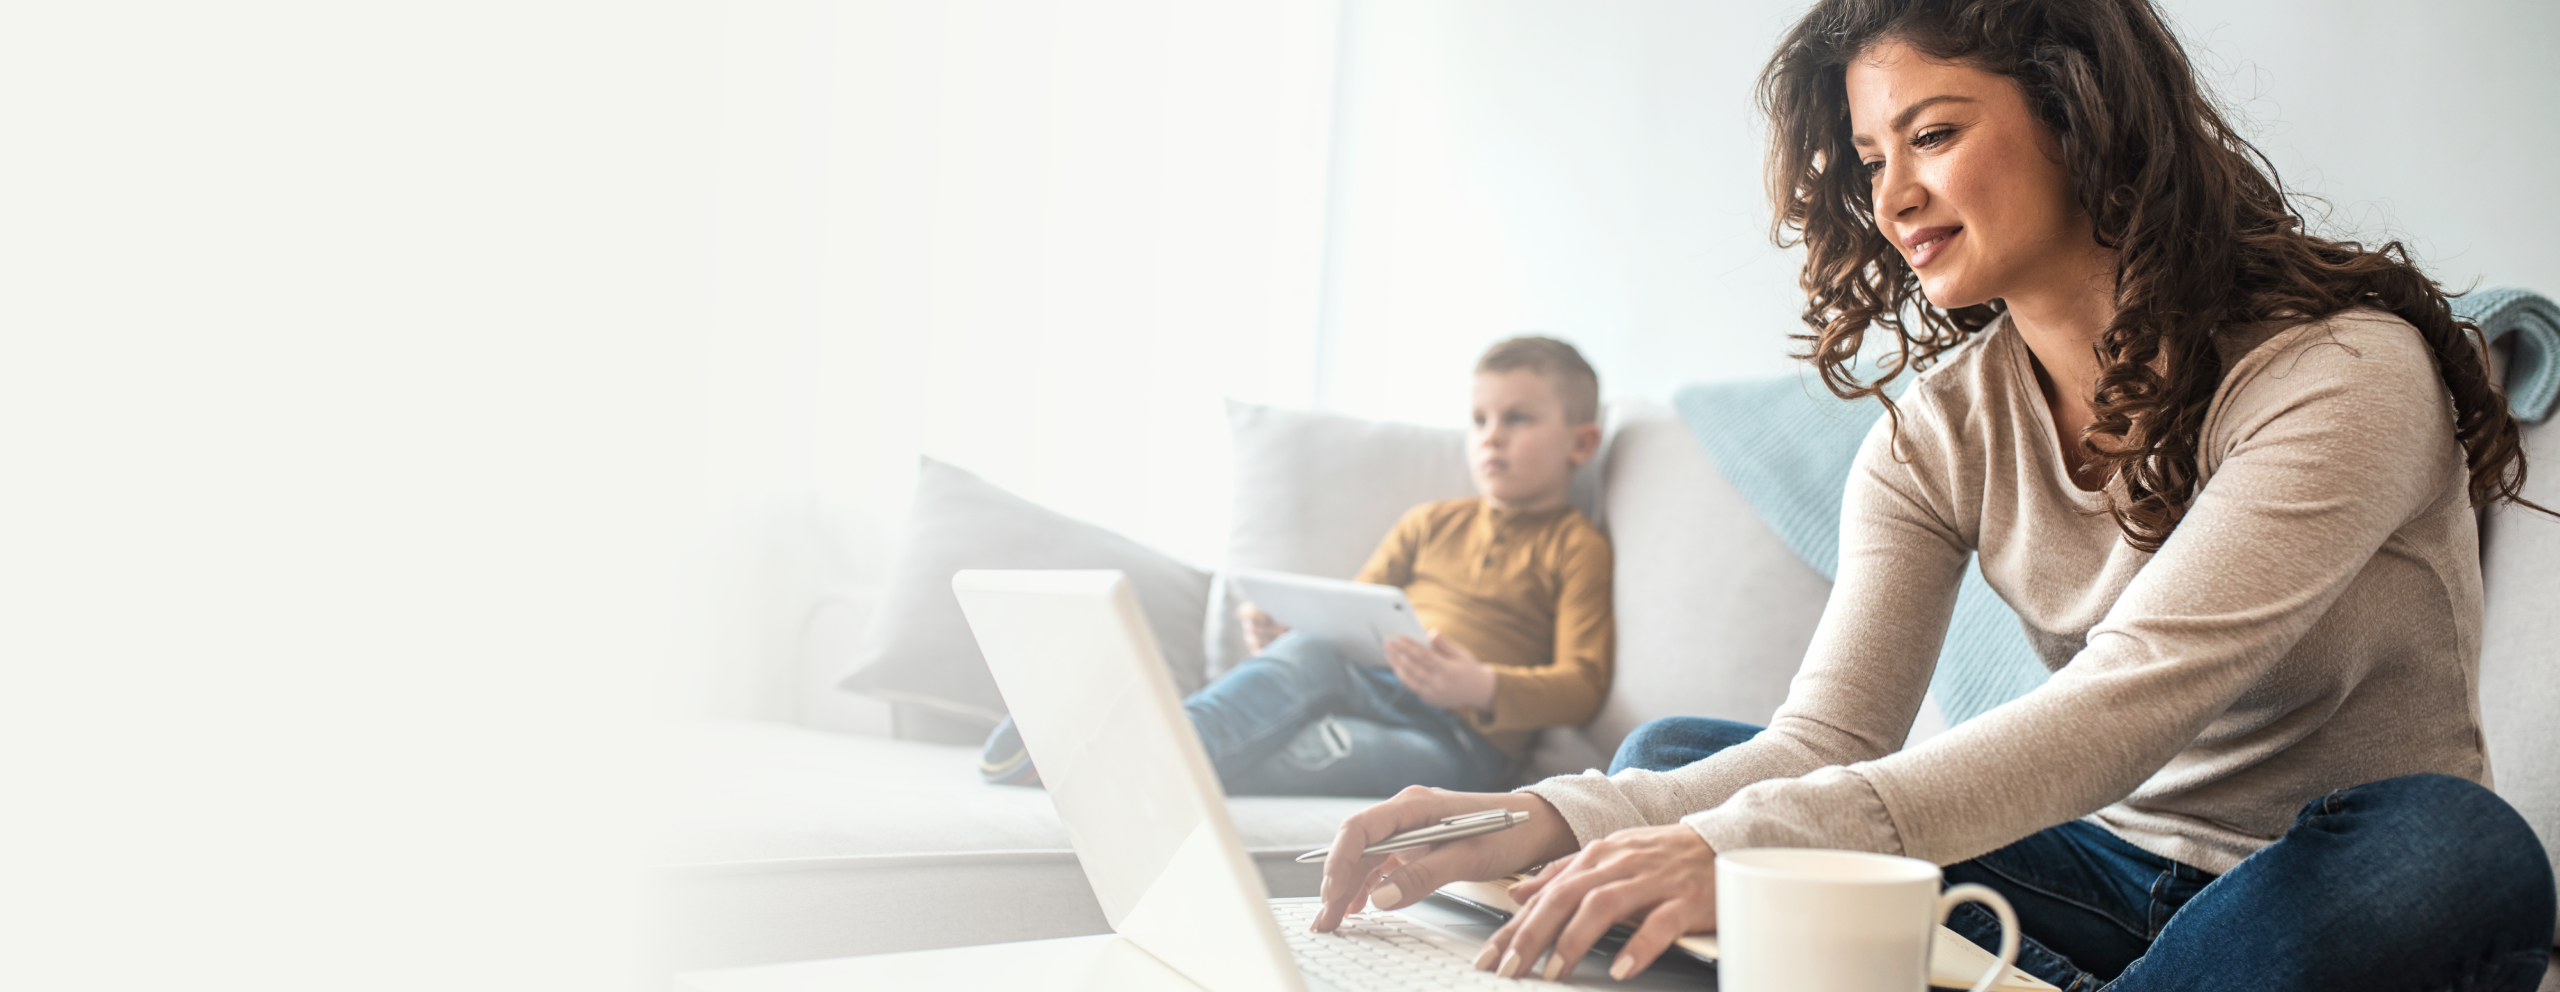 Woman on laptop and son using tablet in living room